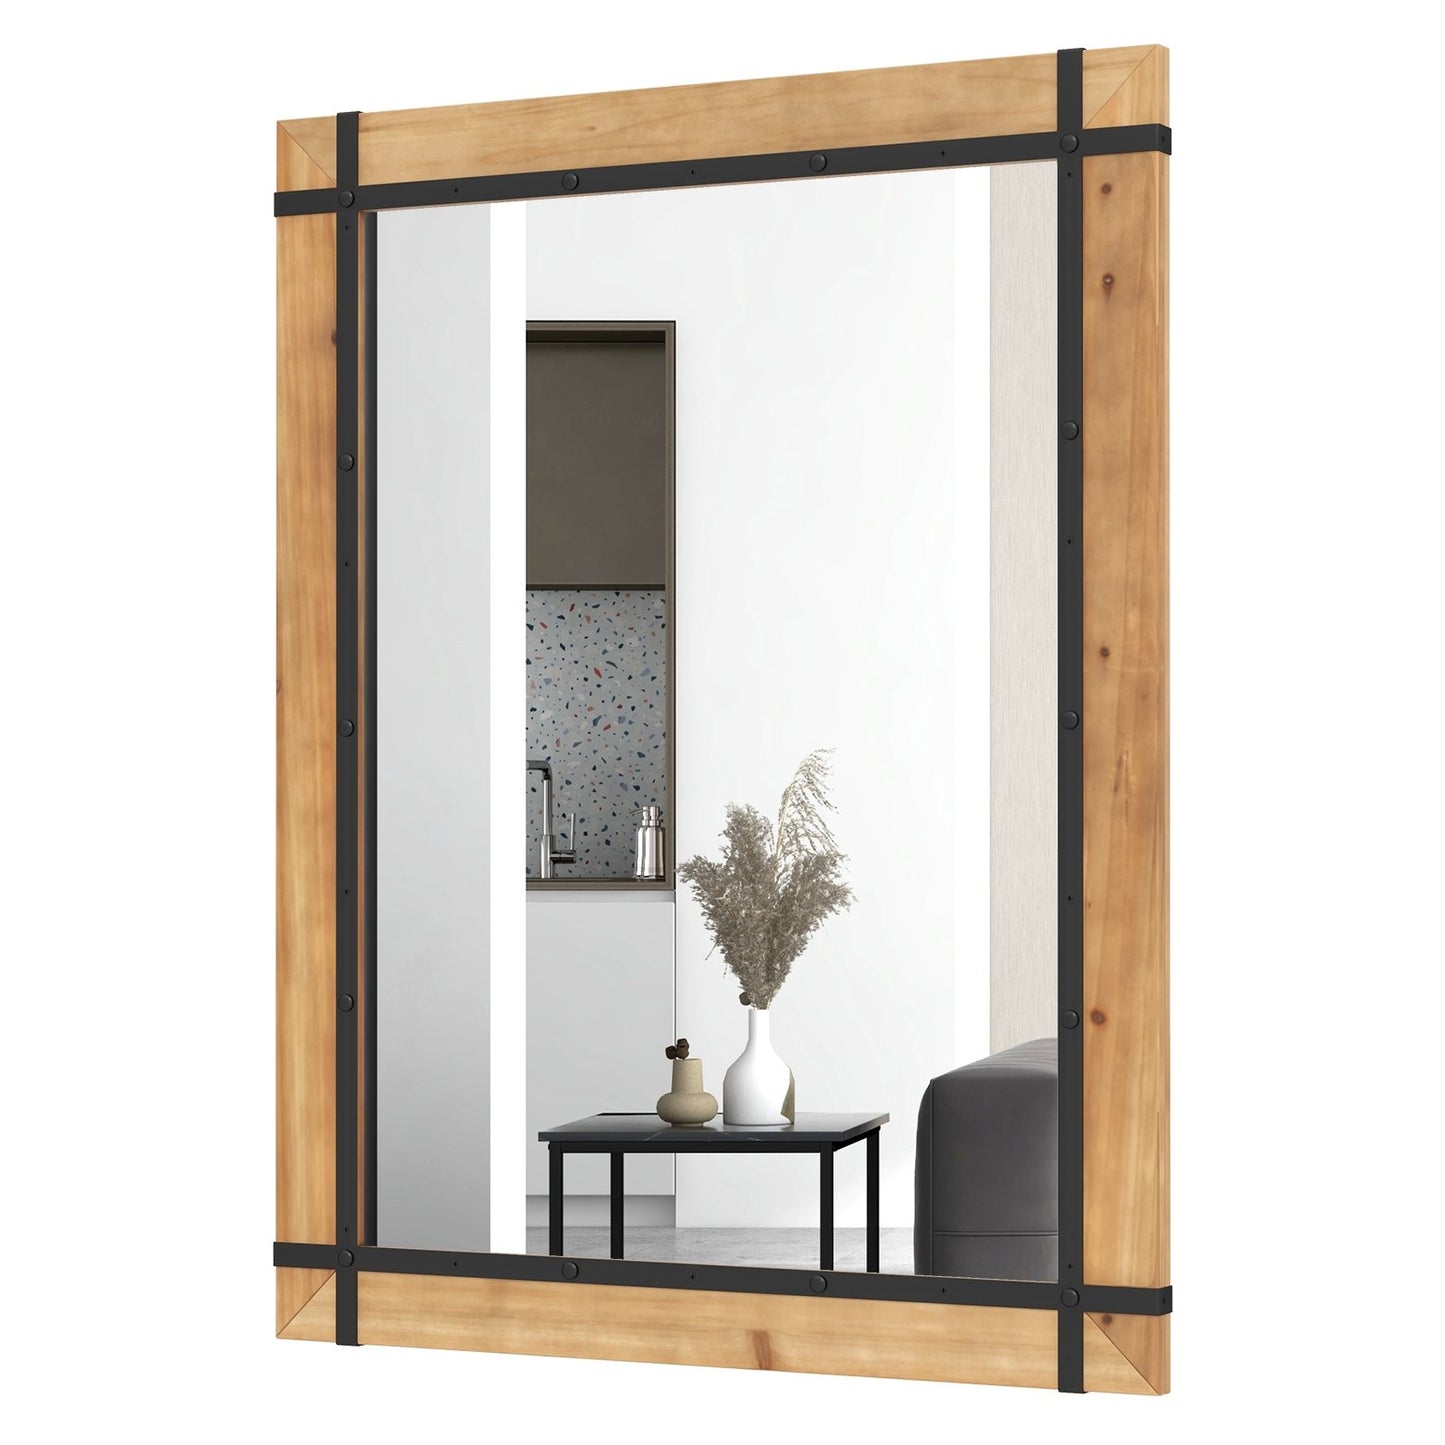 30 x 40 Inch Wall Mounted Mirror with Fir Wood Frame, Natural